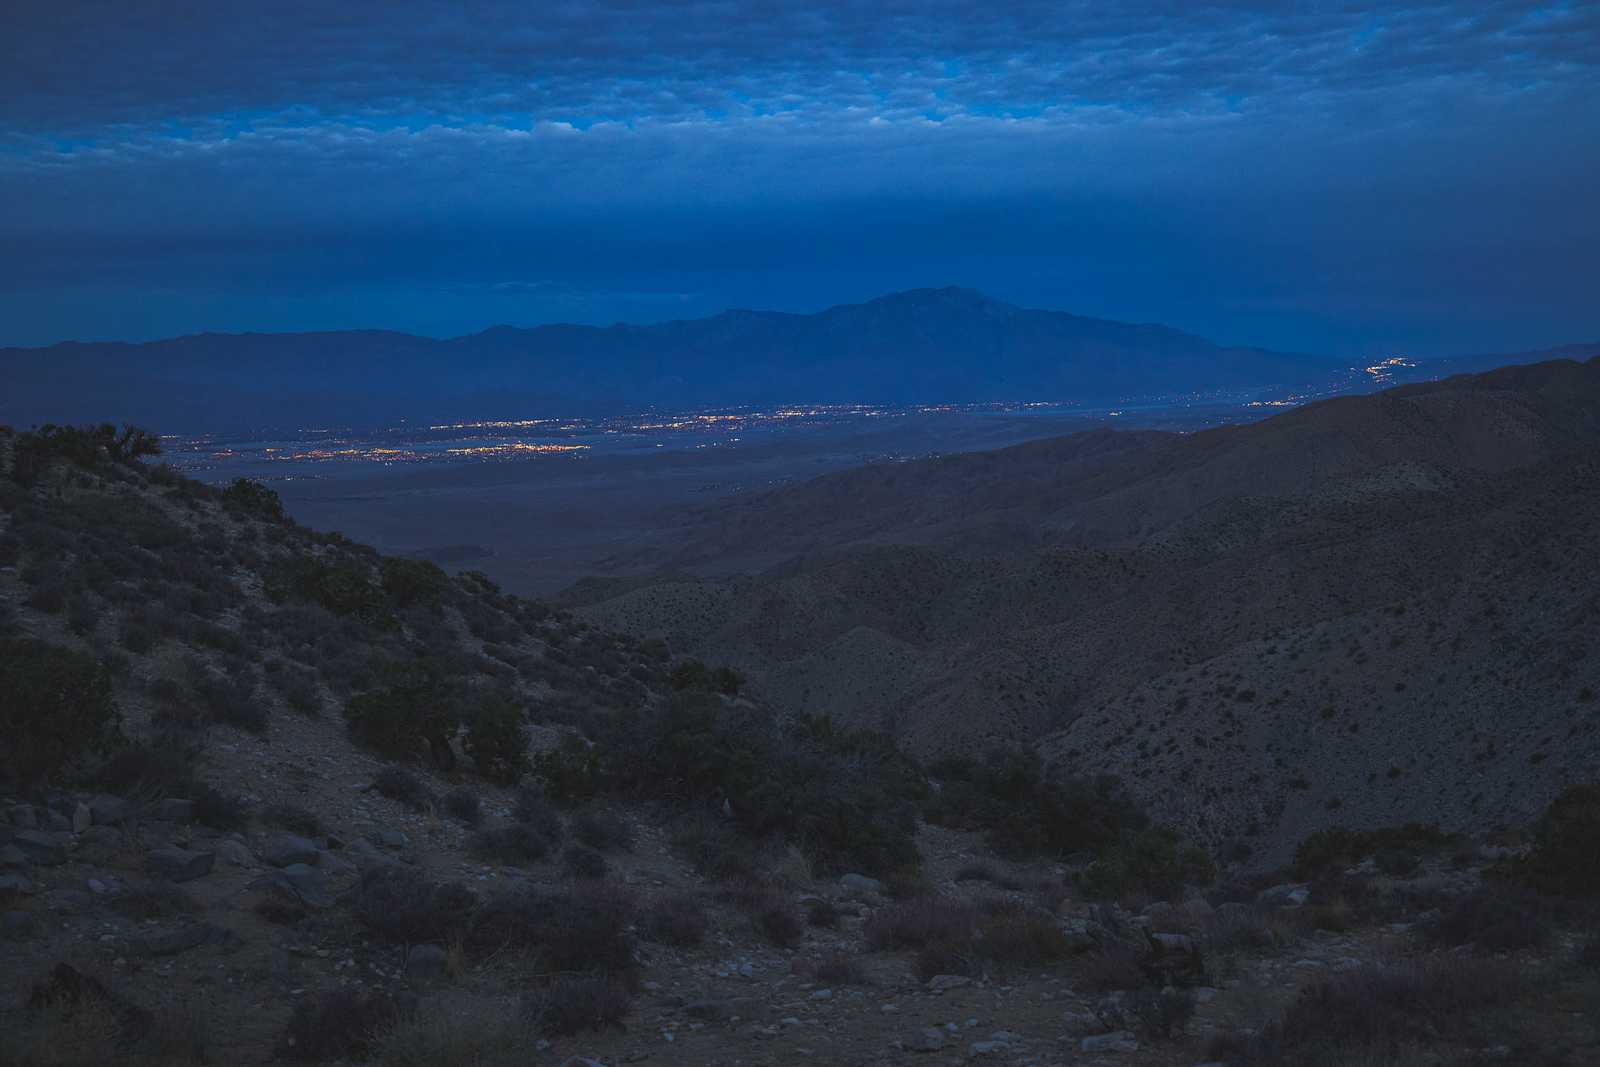 A wide angle shot of the vista from Key's View showing the lights from Palm Springs